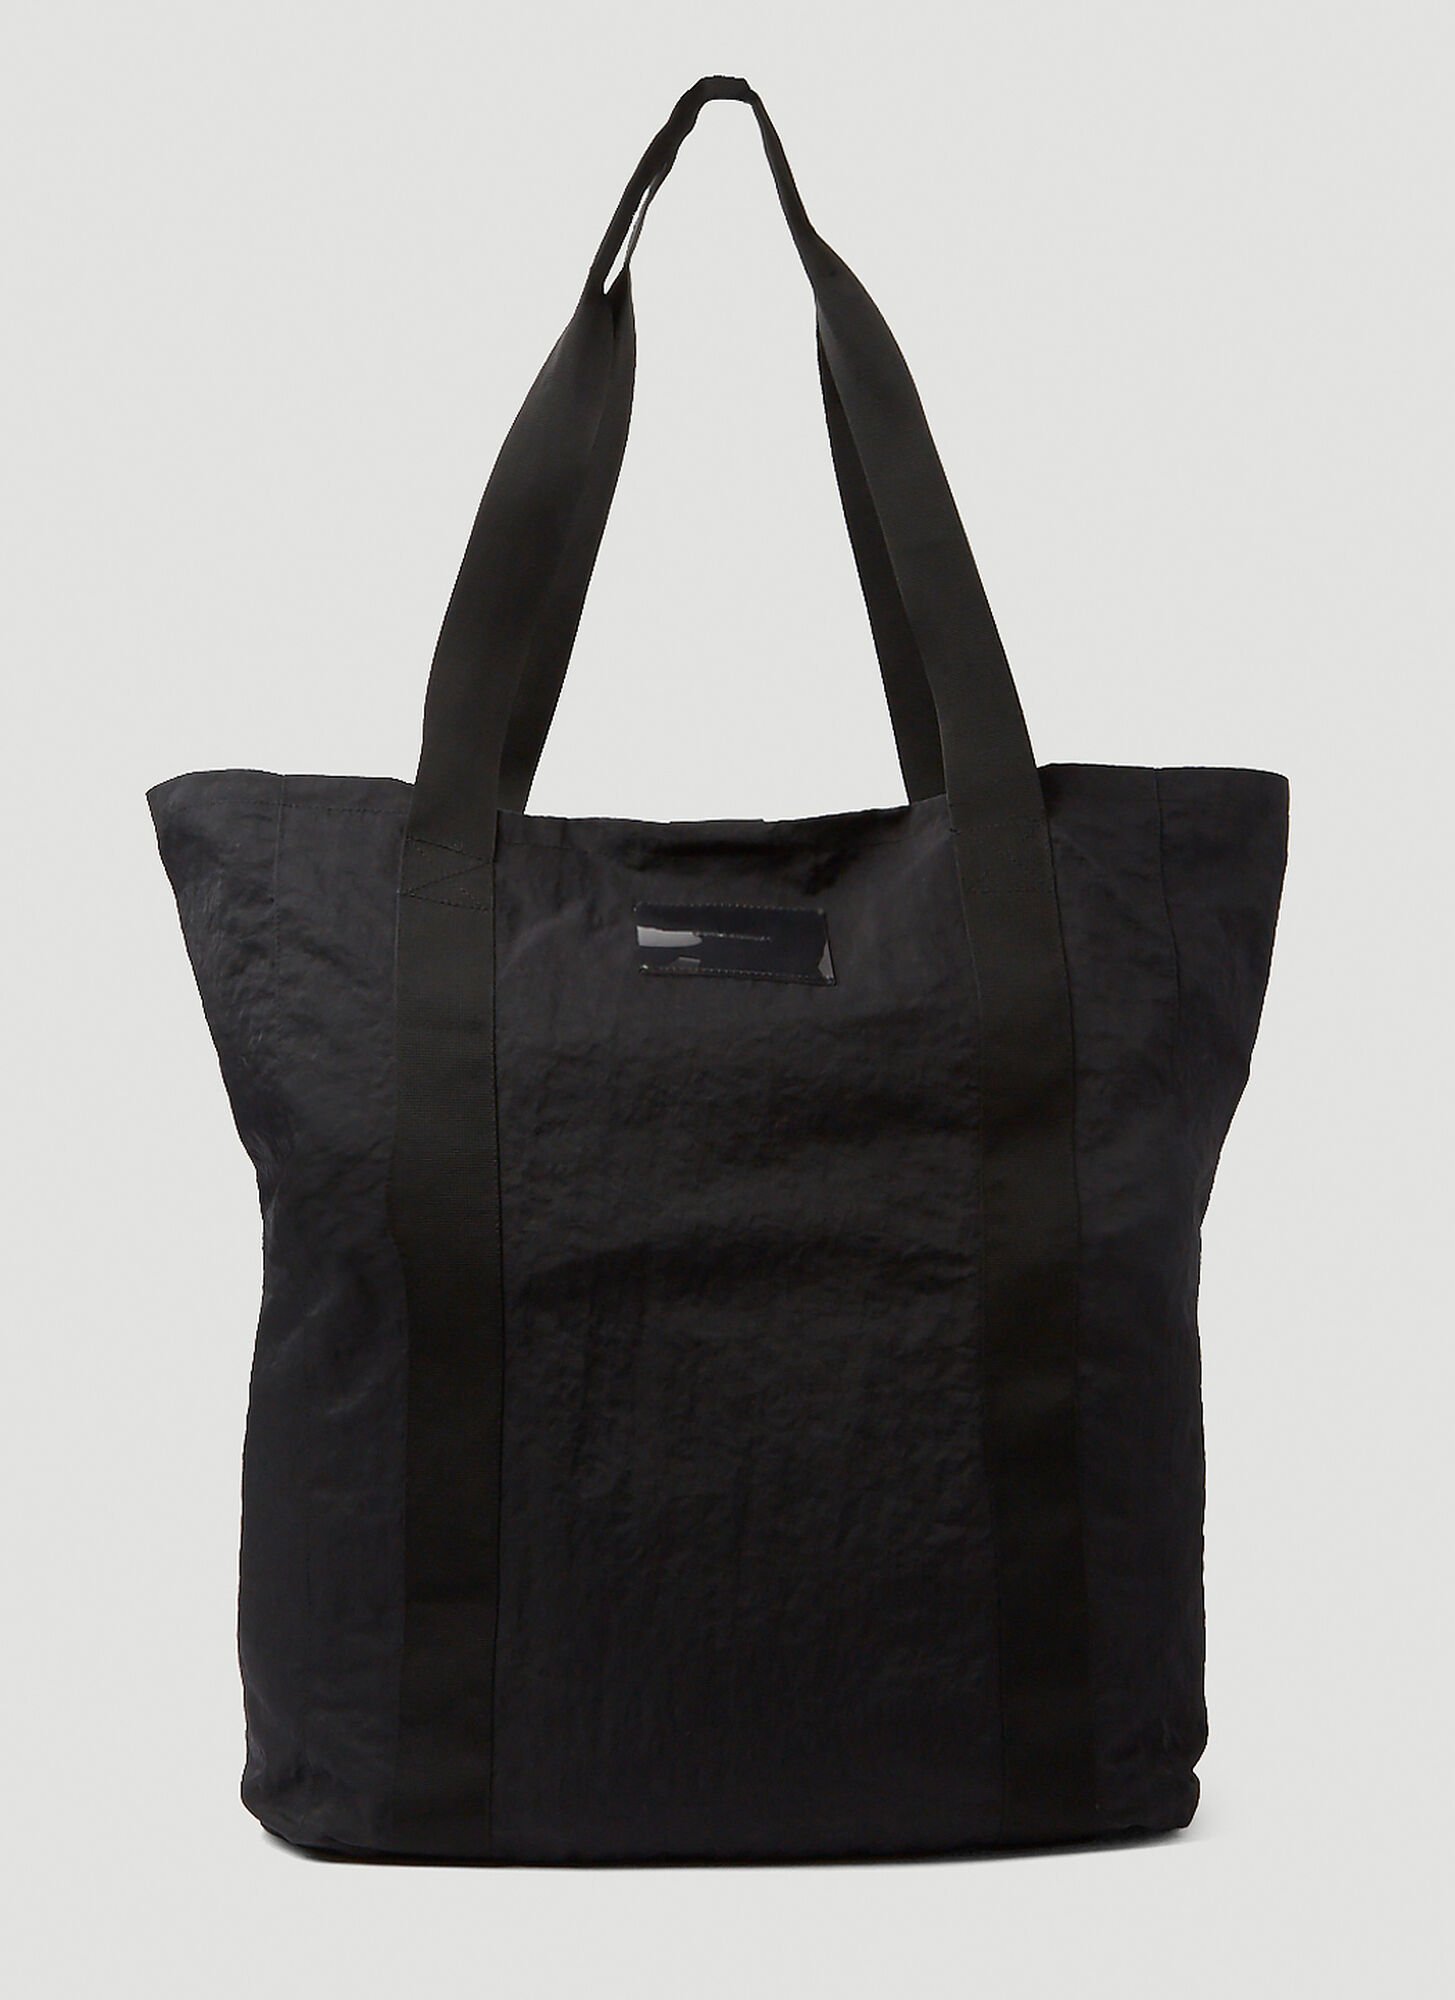 OUR LEGACY FLIGHT TOTE BAG